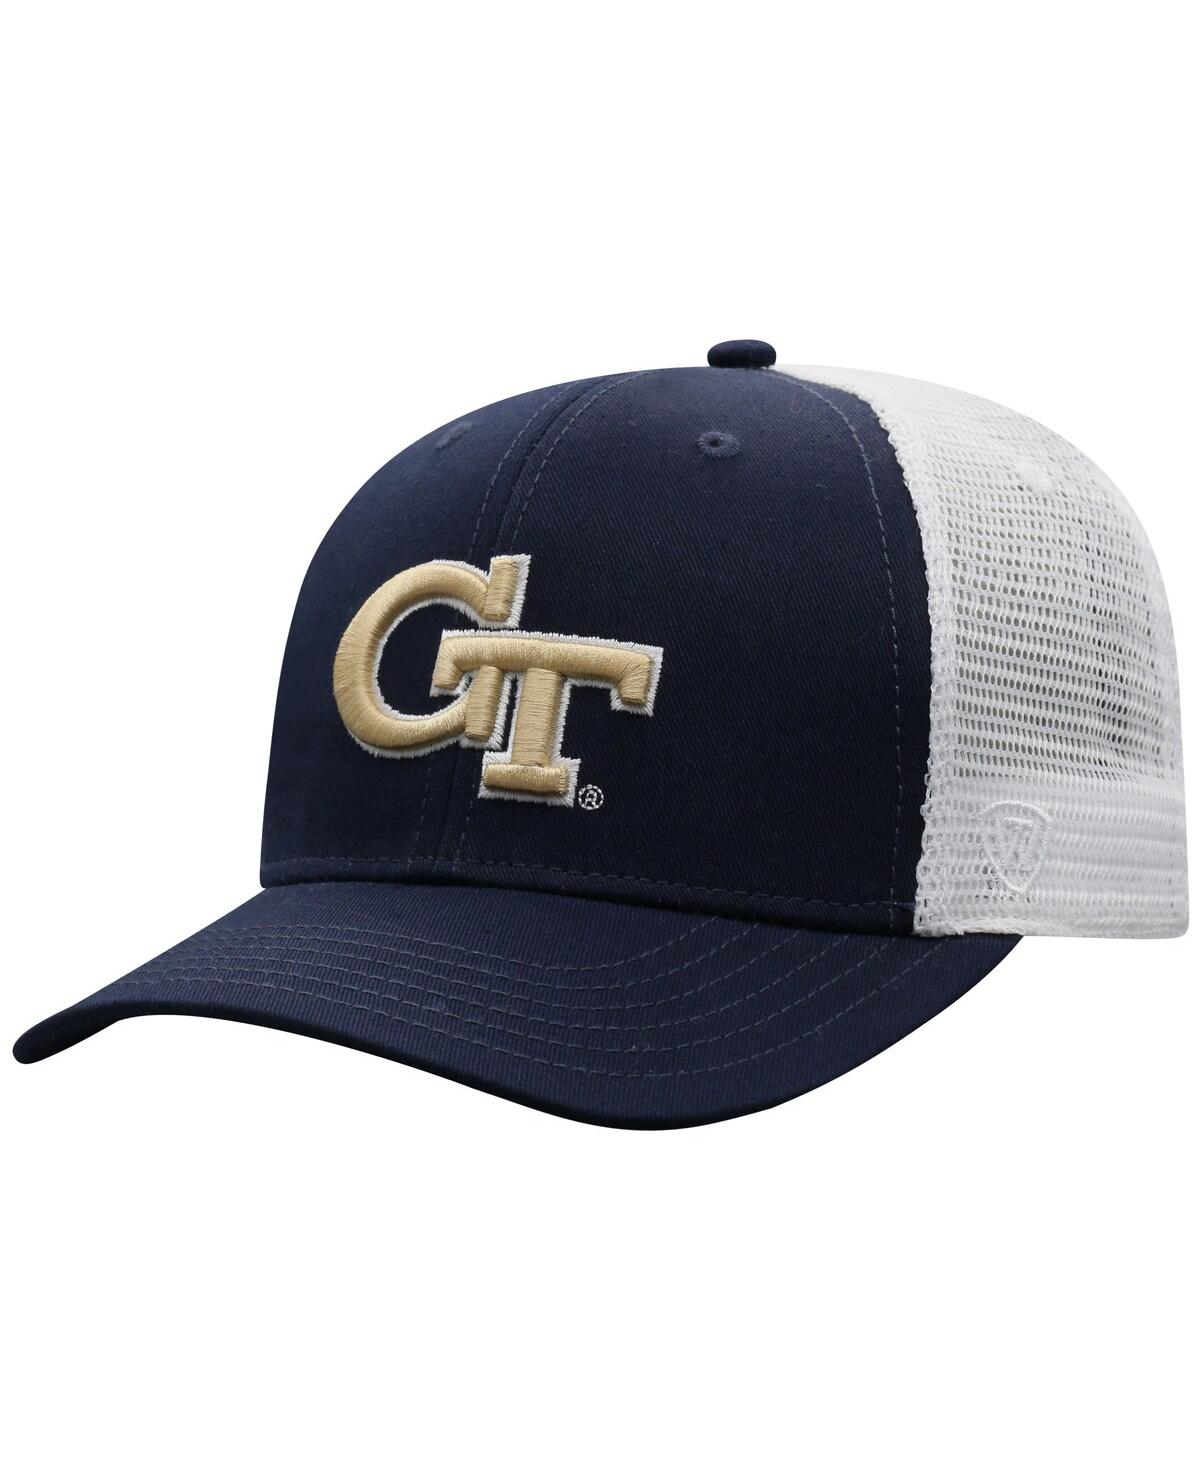 Shop Top Of The World Men's  Navy, White Georgia Tech Yellow Jackets Trucker Snapback Hat In Navy,white